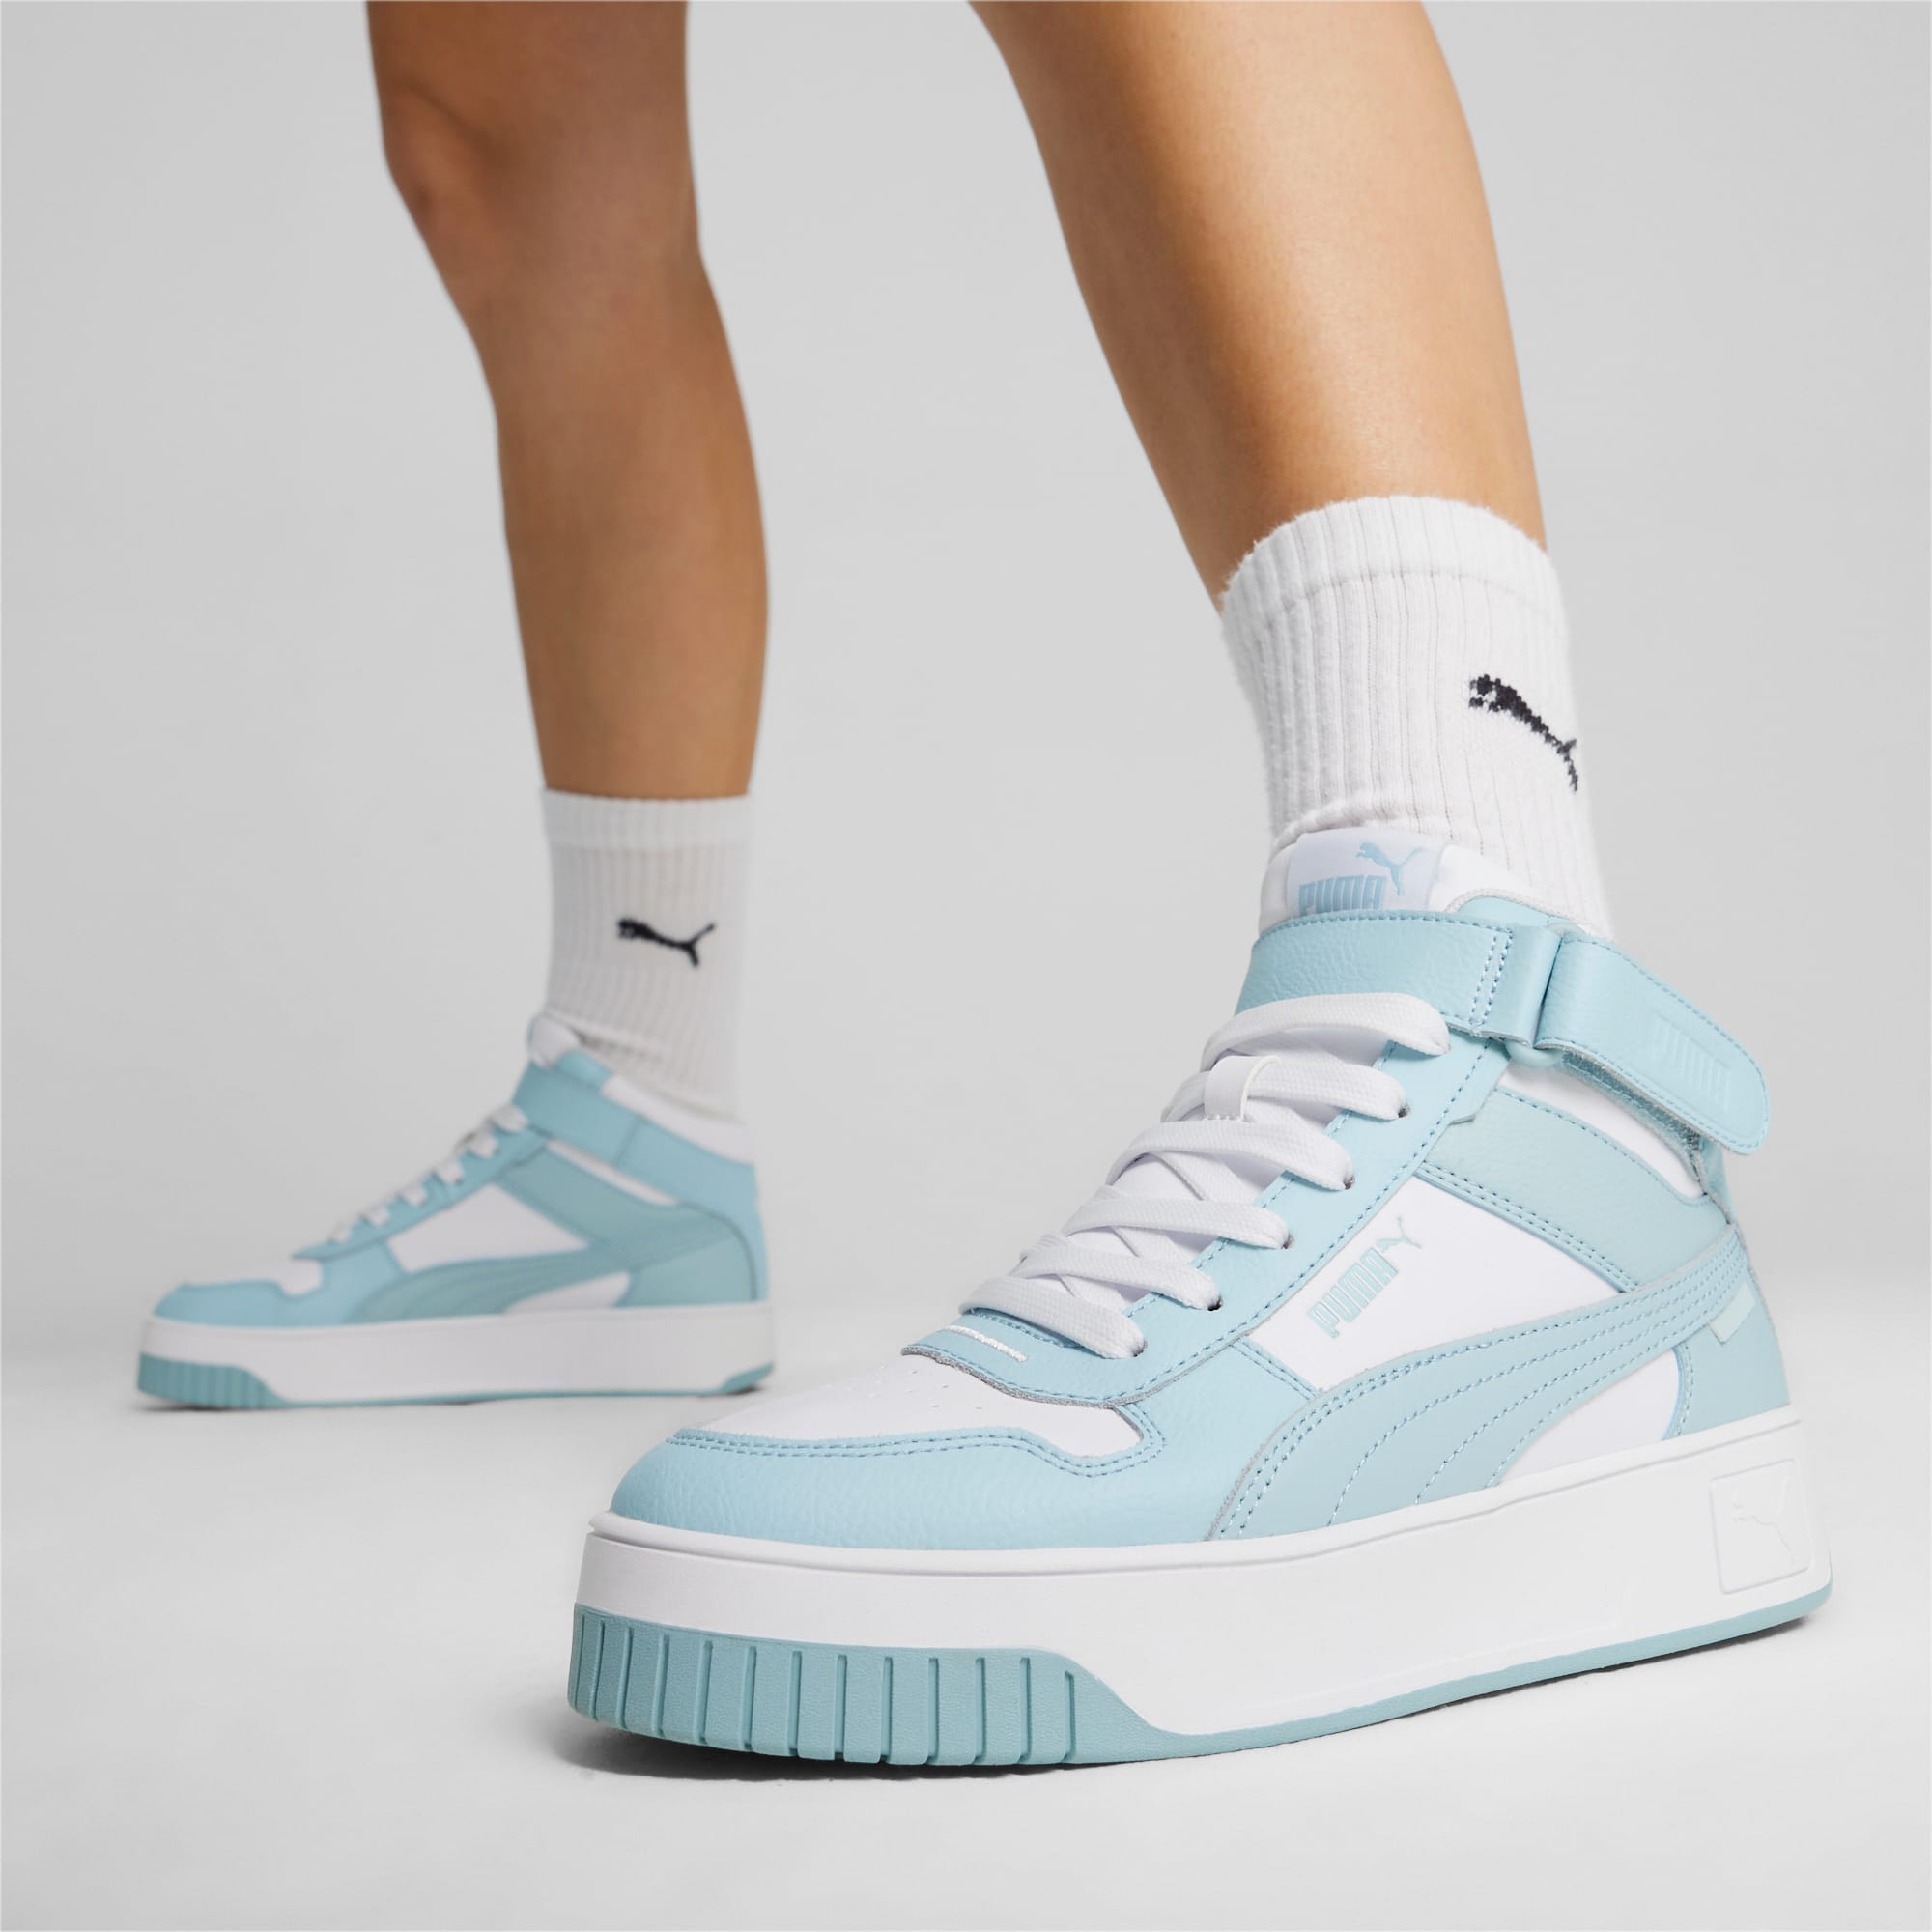 PUMA Carina Street Mid Women's Sneakers, White/Turquoise Surf, Size 38,5, Shoes